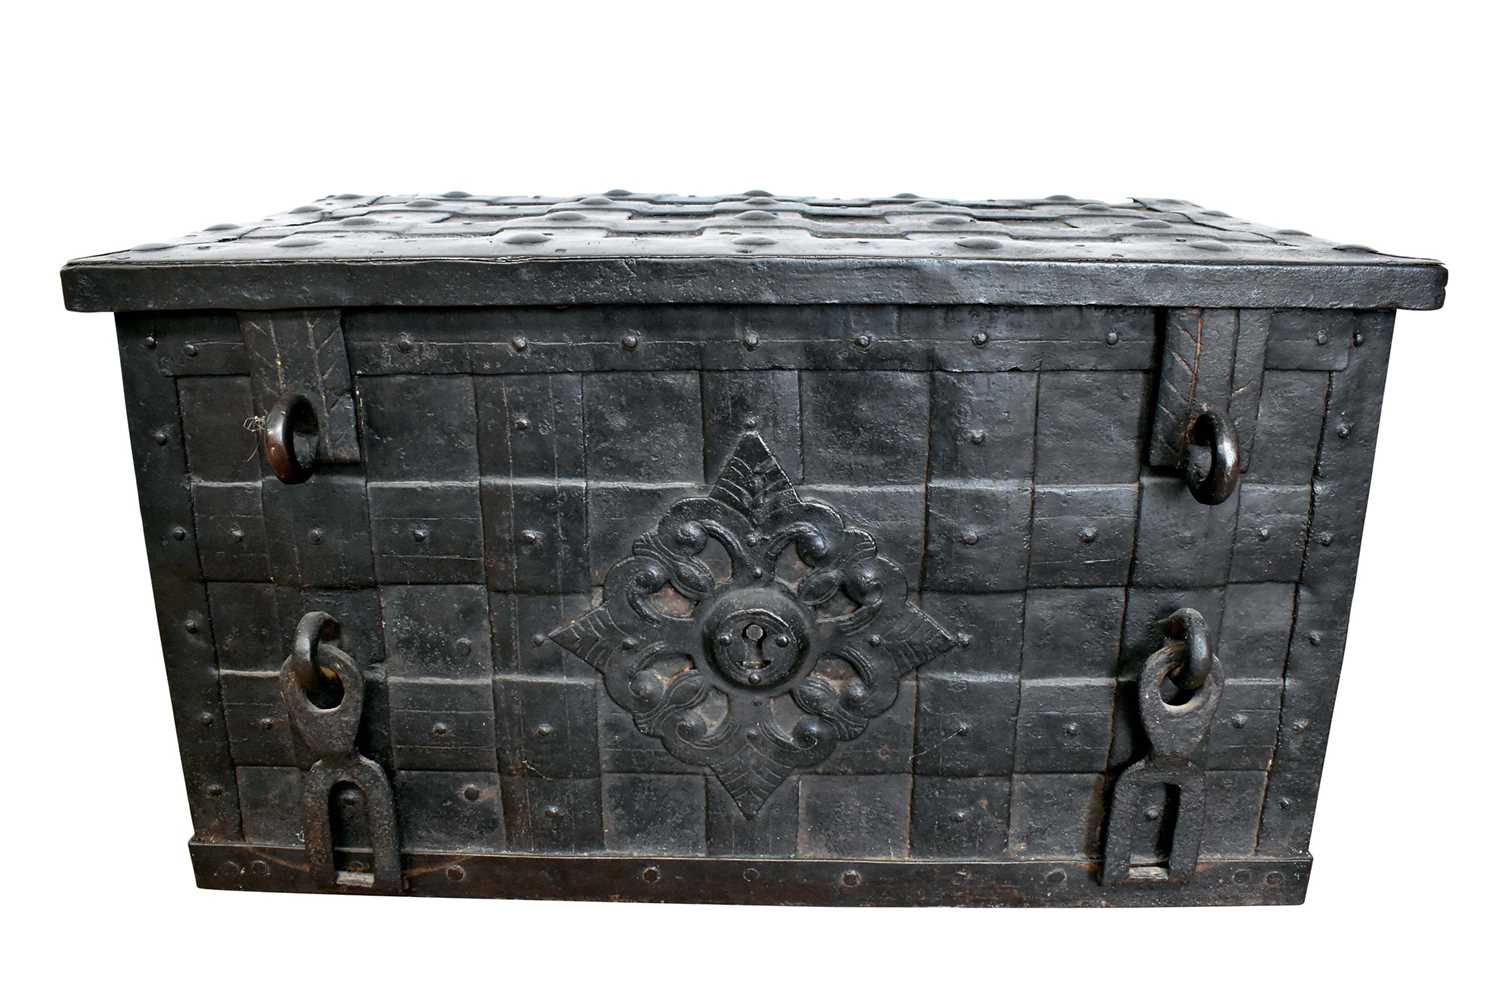 17th century German iron Armada chest with intricate locking system, key marked S. Morden